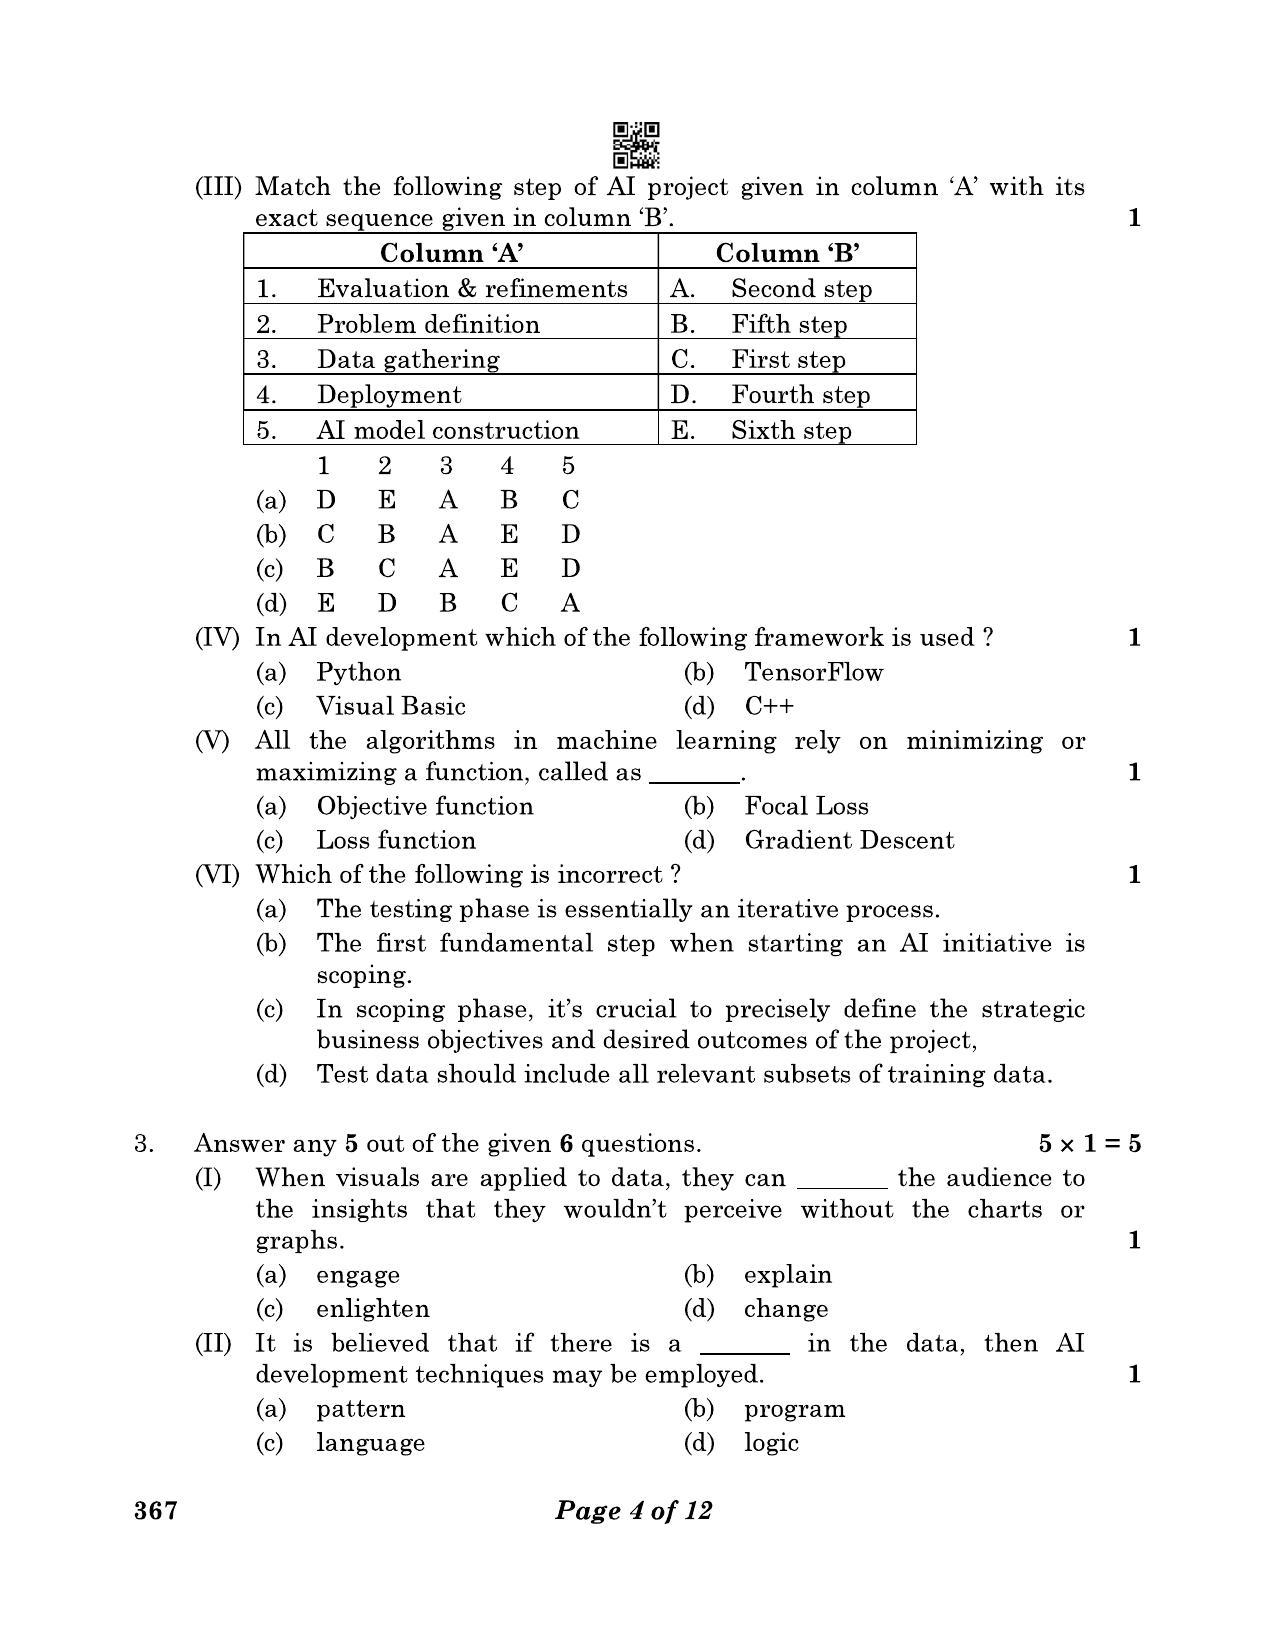 CBSE Class 12 367_Artificial Intelligence 2023 Question Paper - Page 4